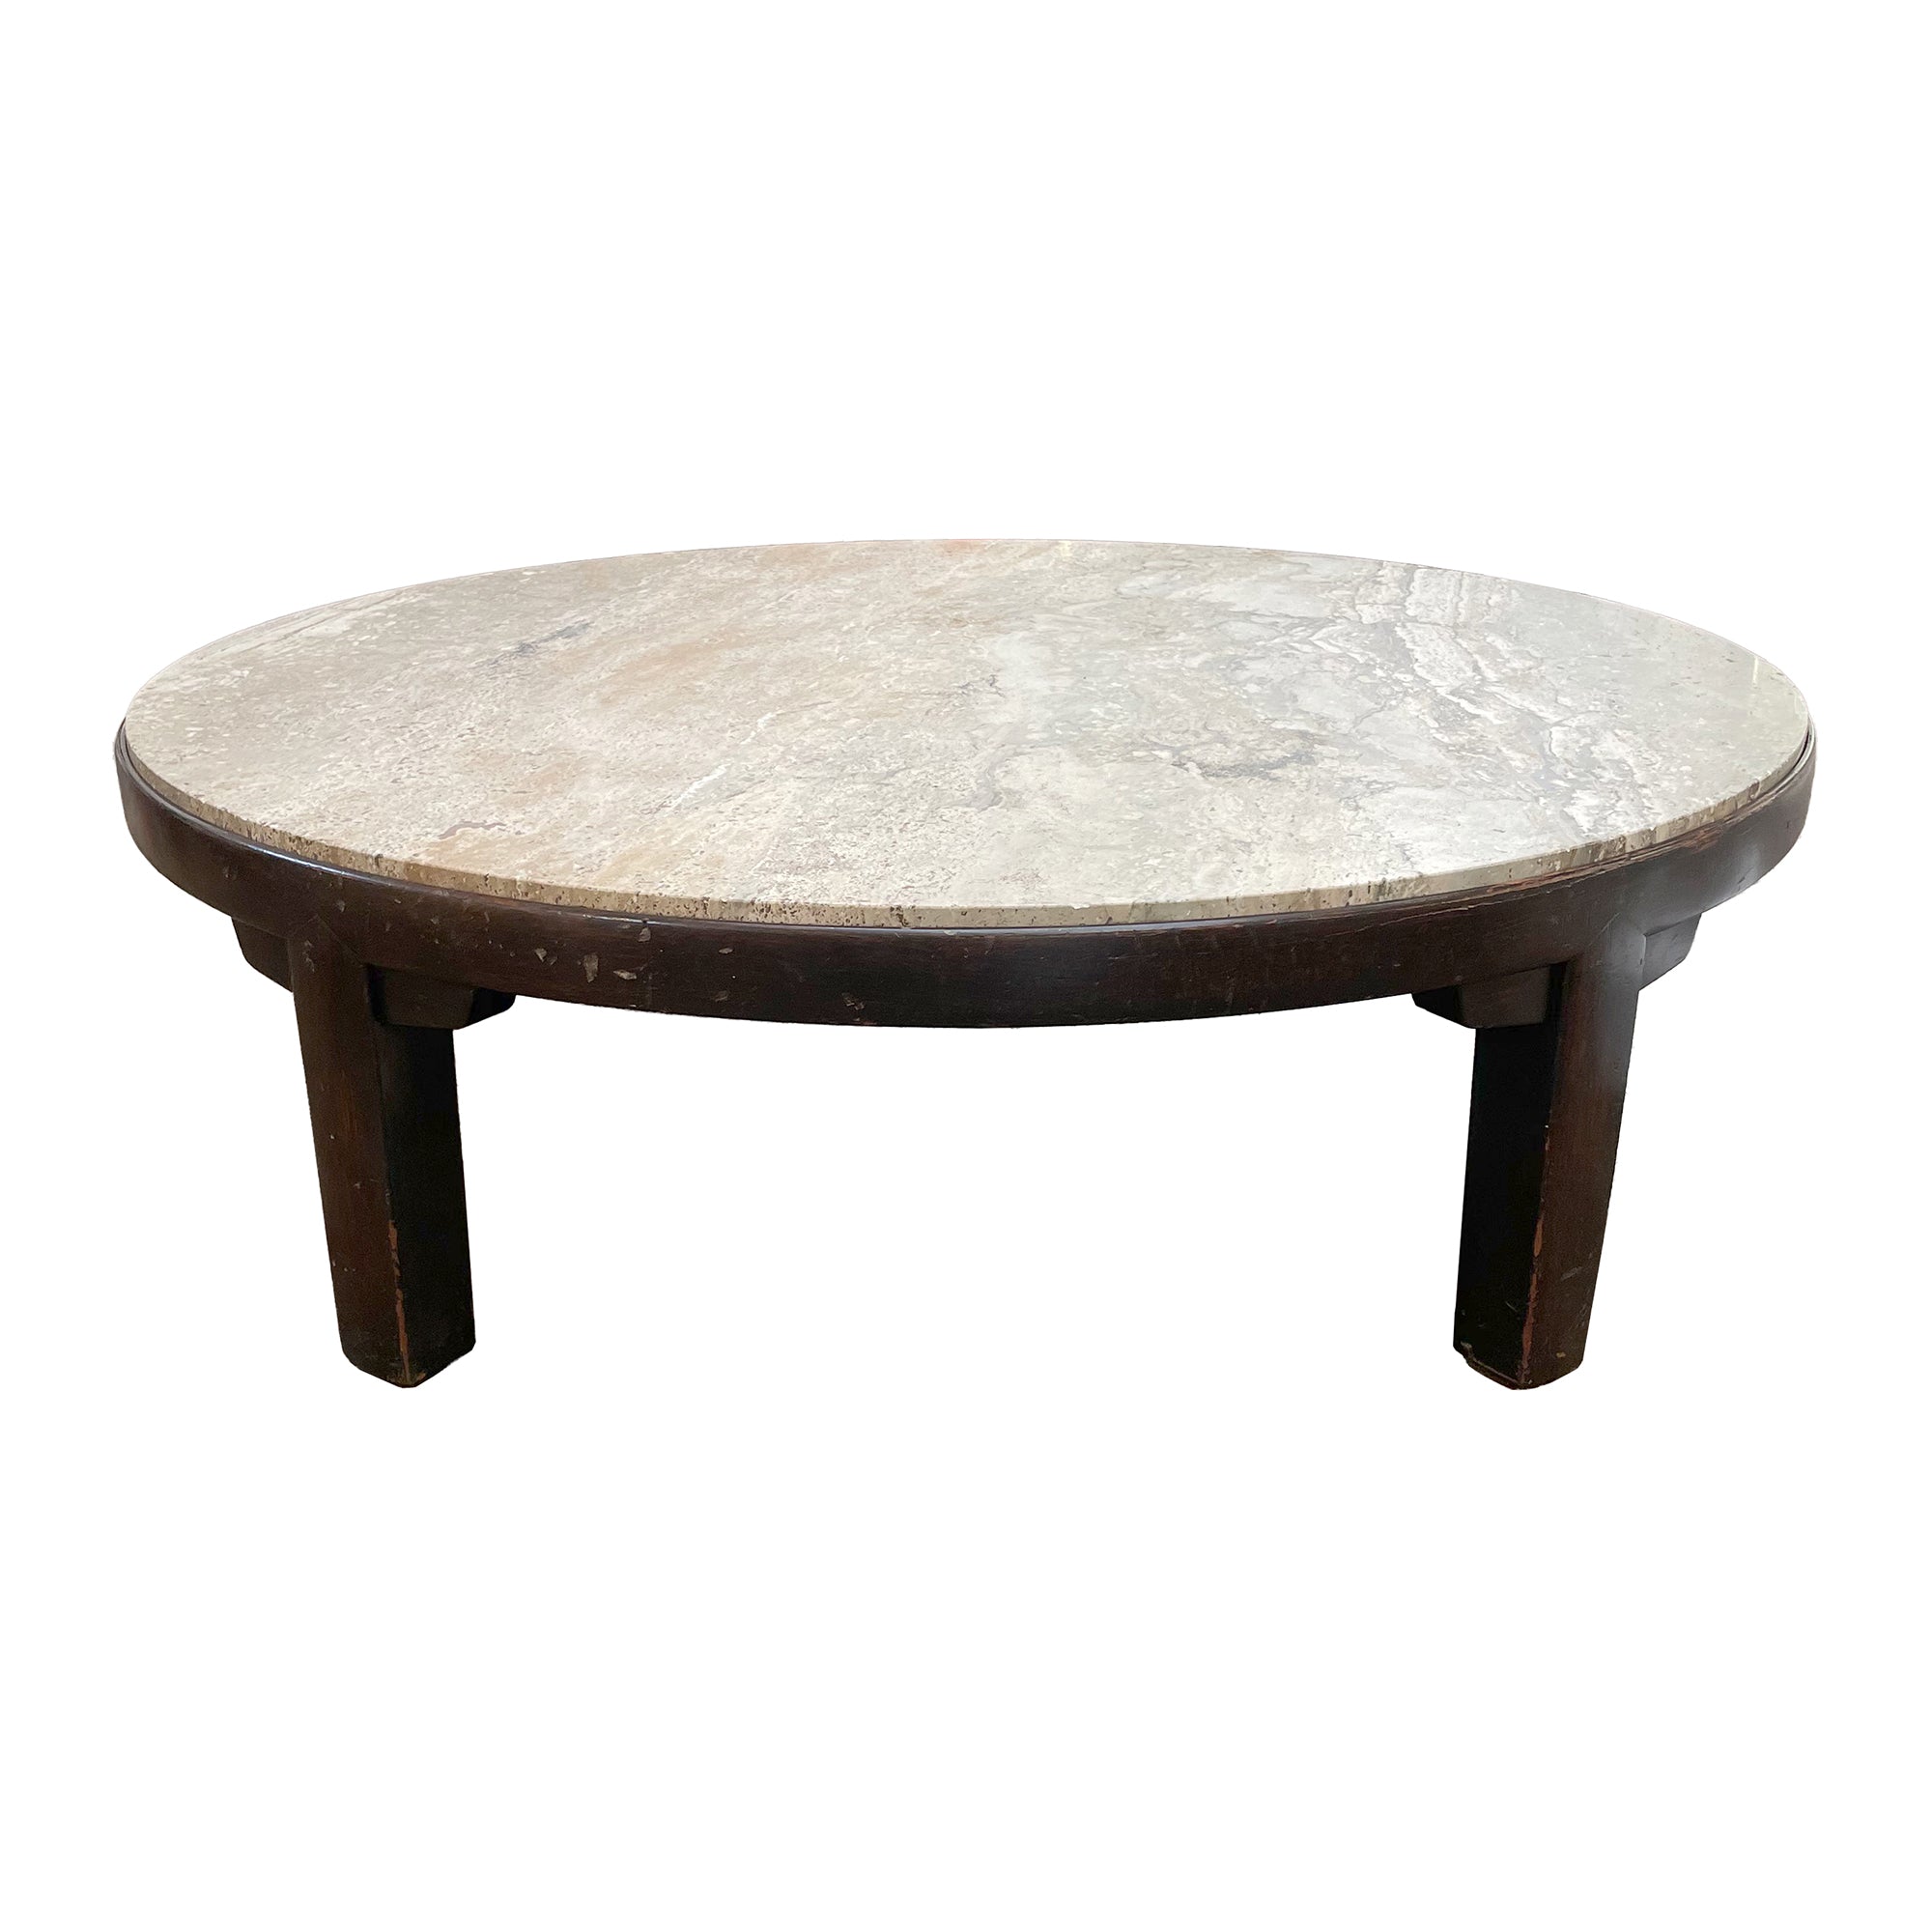 Large Round Travertine & Wood Coffee Table by Dunbar